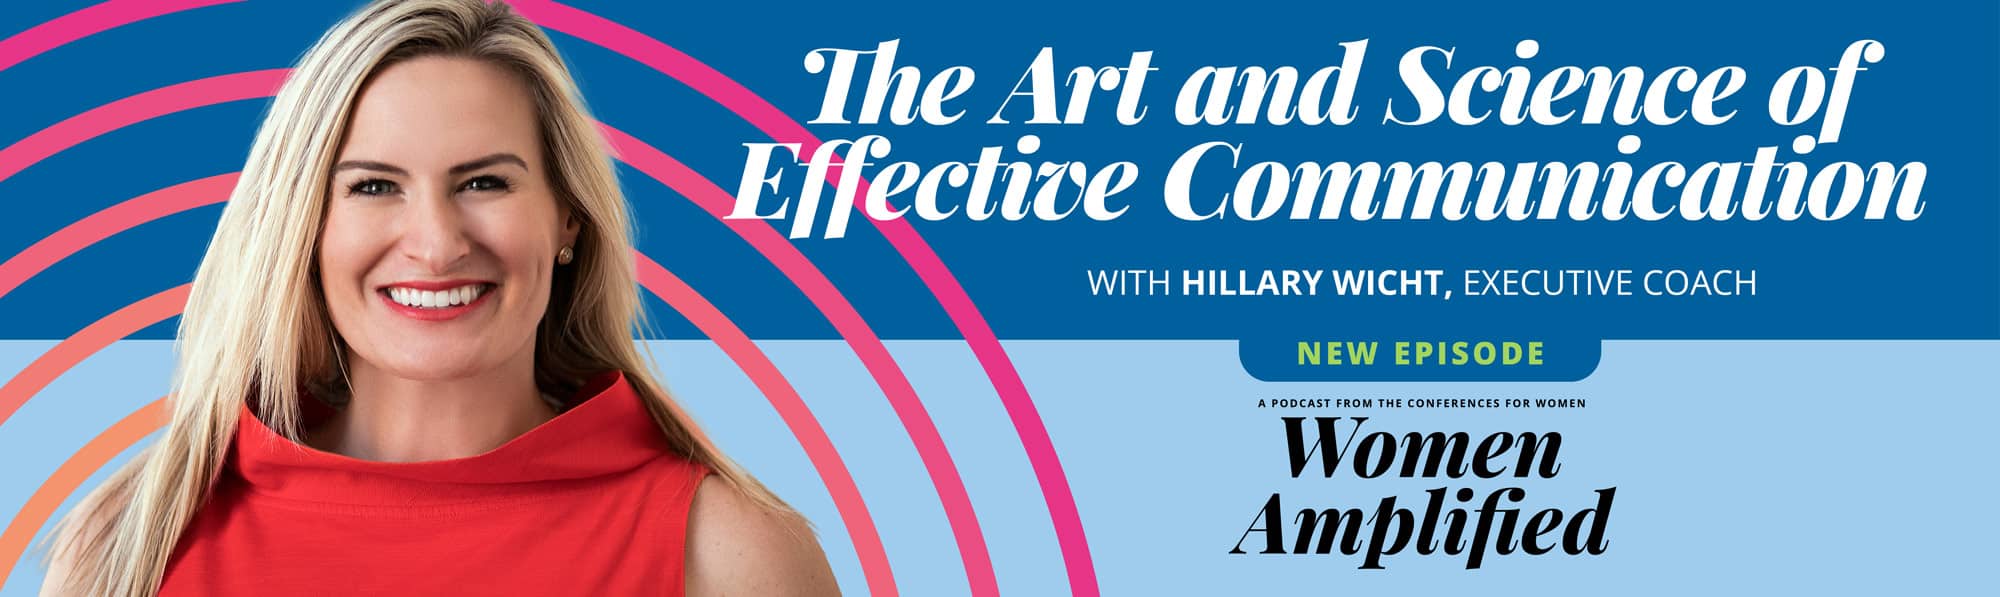 The Art & Science of Effective Communication with Hillary Wicht | Women Amplified Podcast